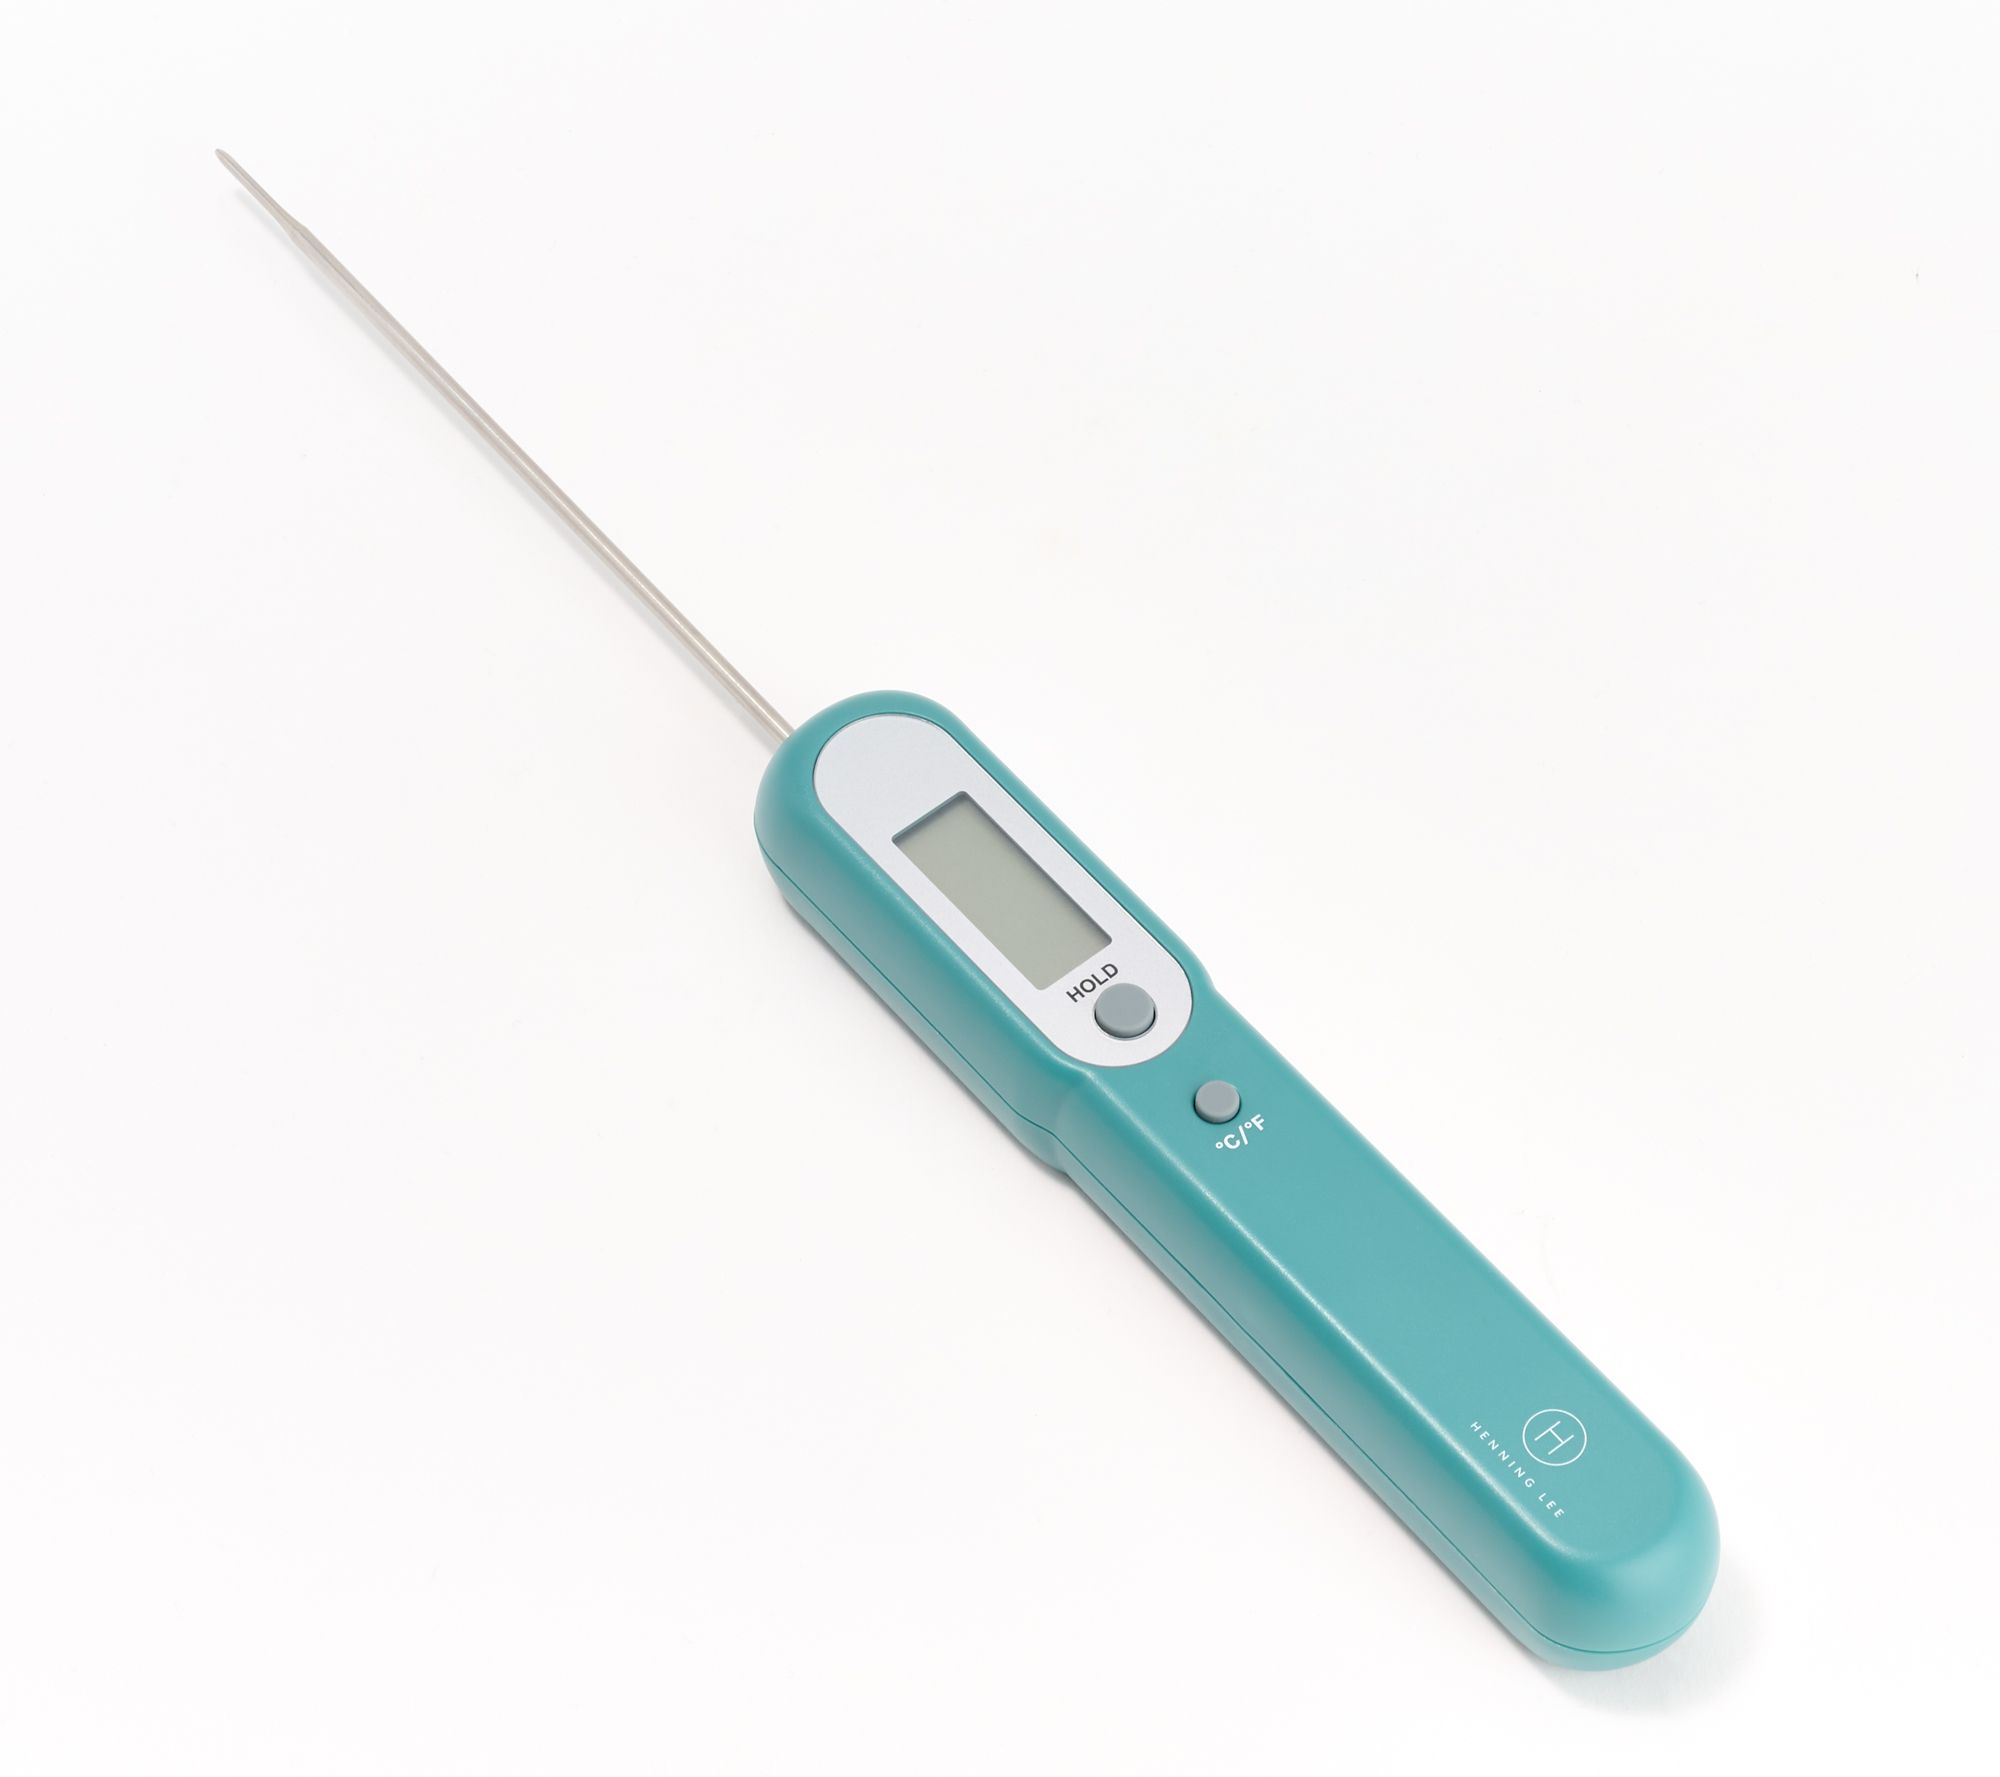 Instant Read Digital Meat Thermometer by Cuisinart